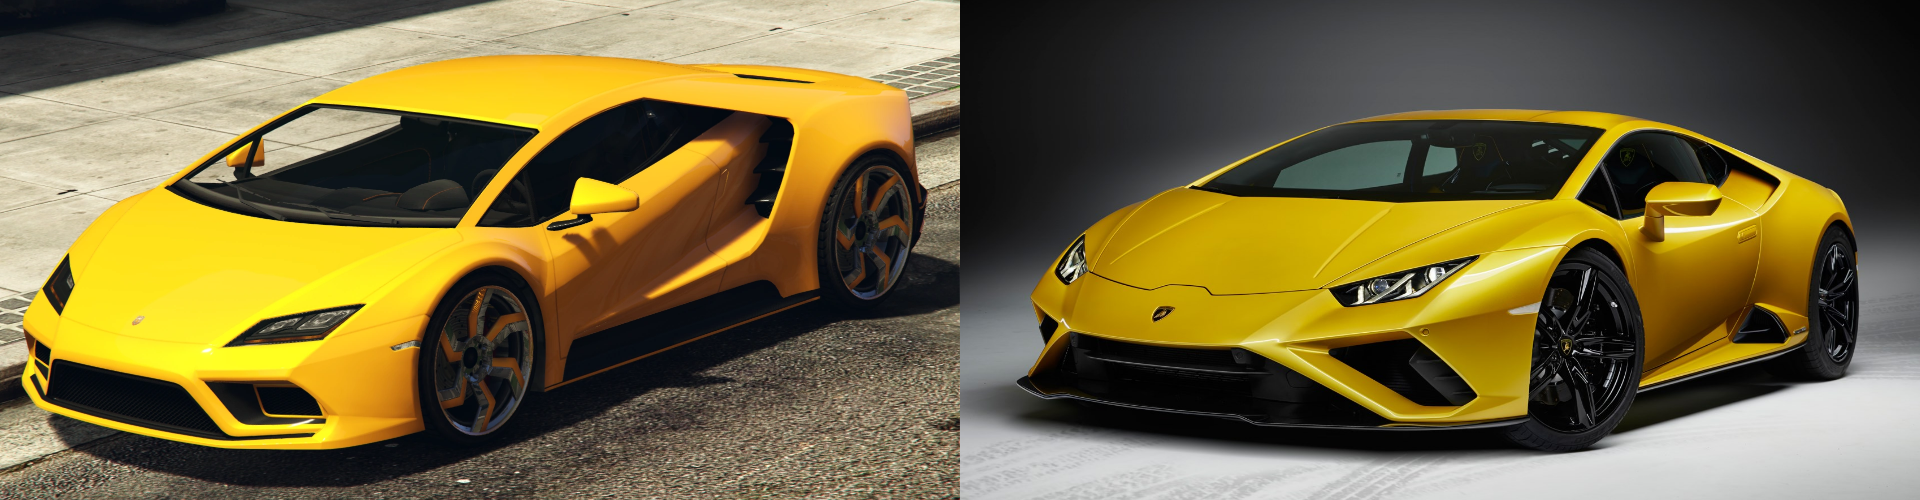 A side by side view of a virtual and real Lamborghini Huracan.